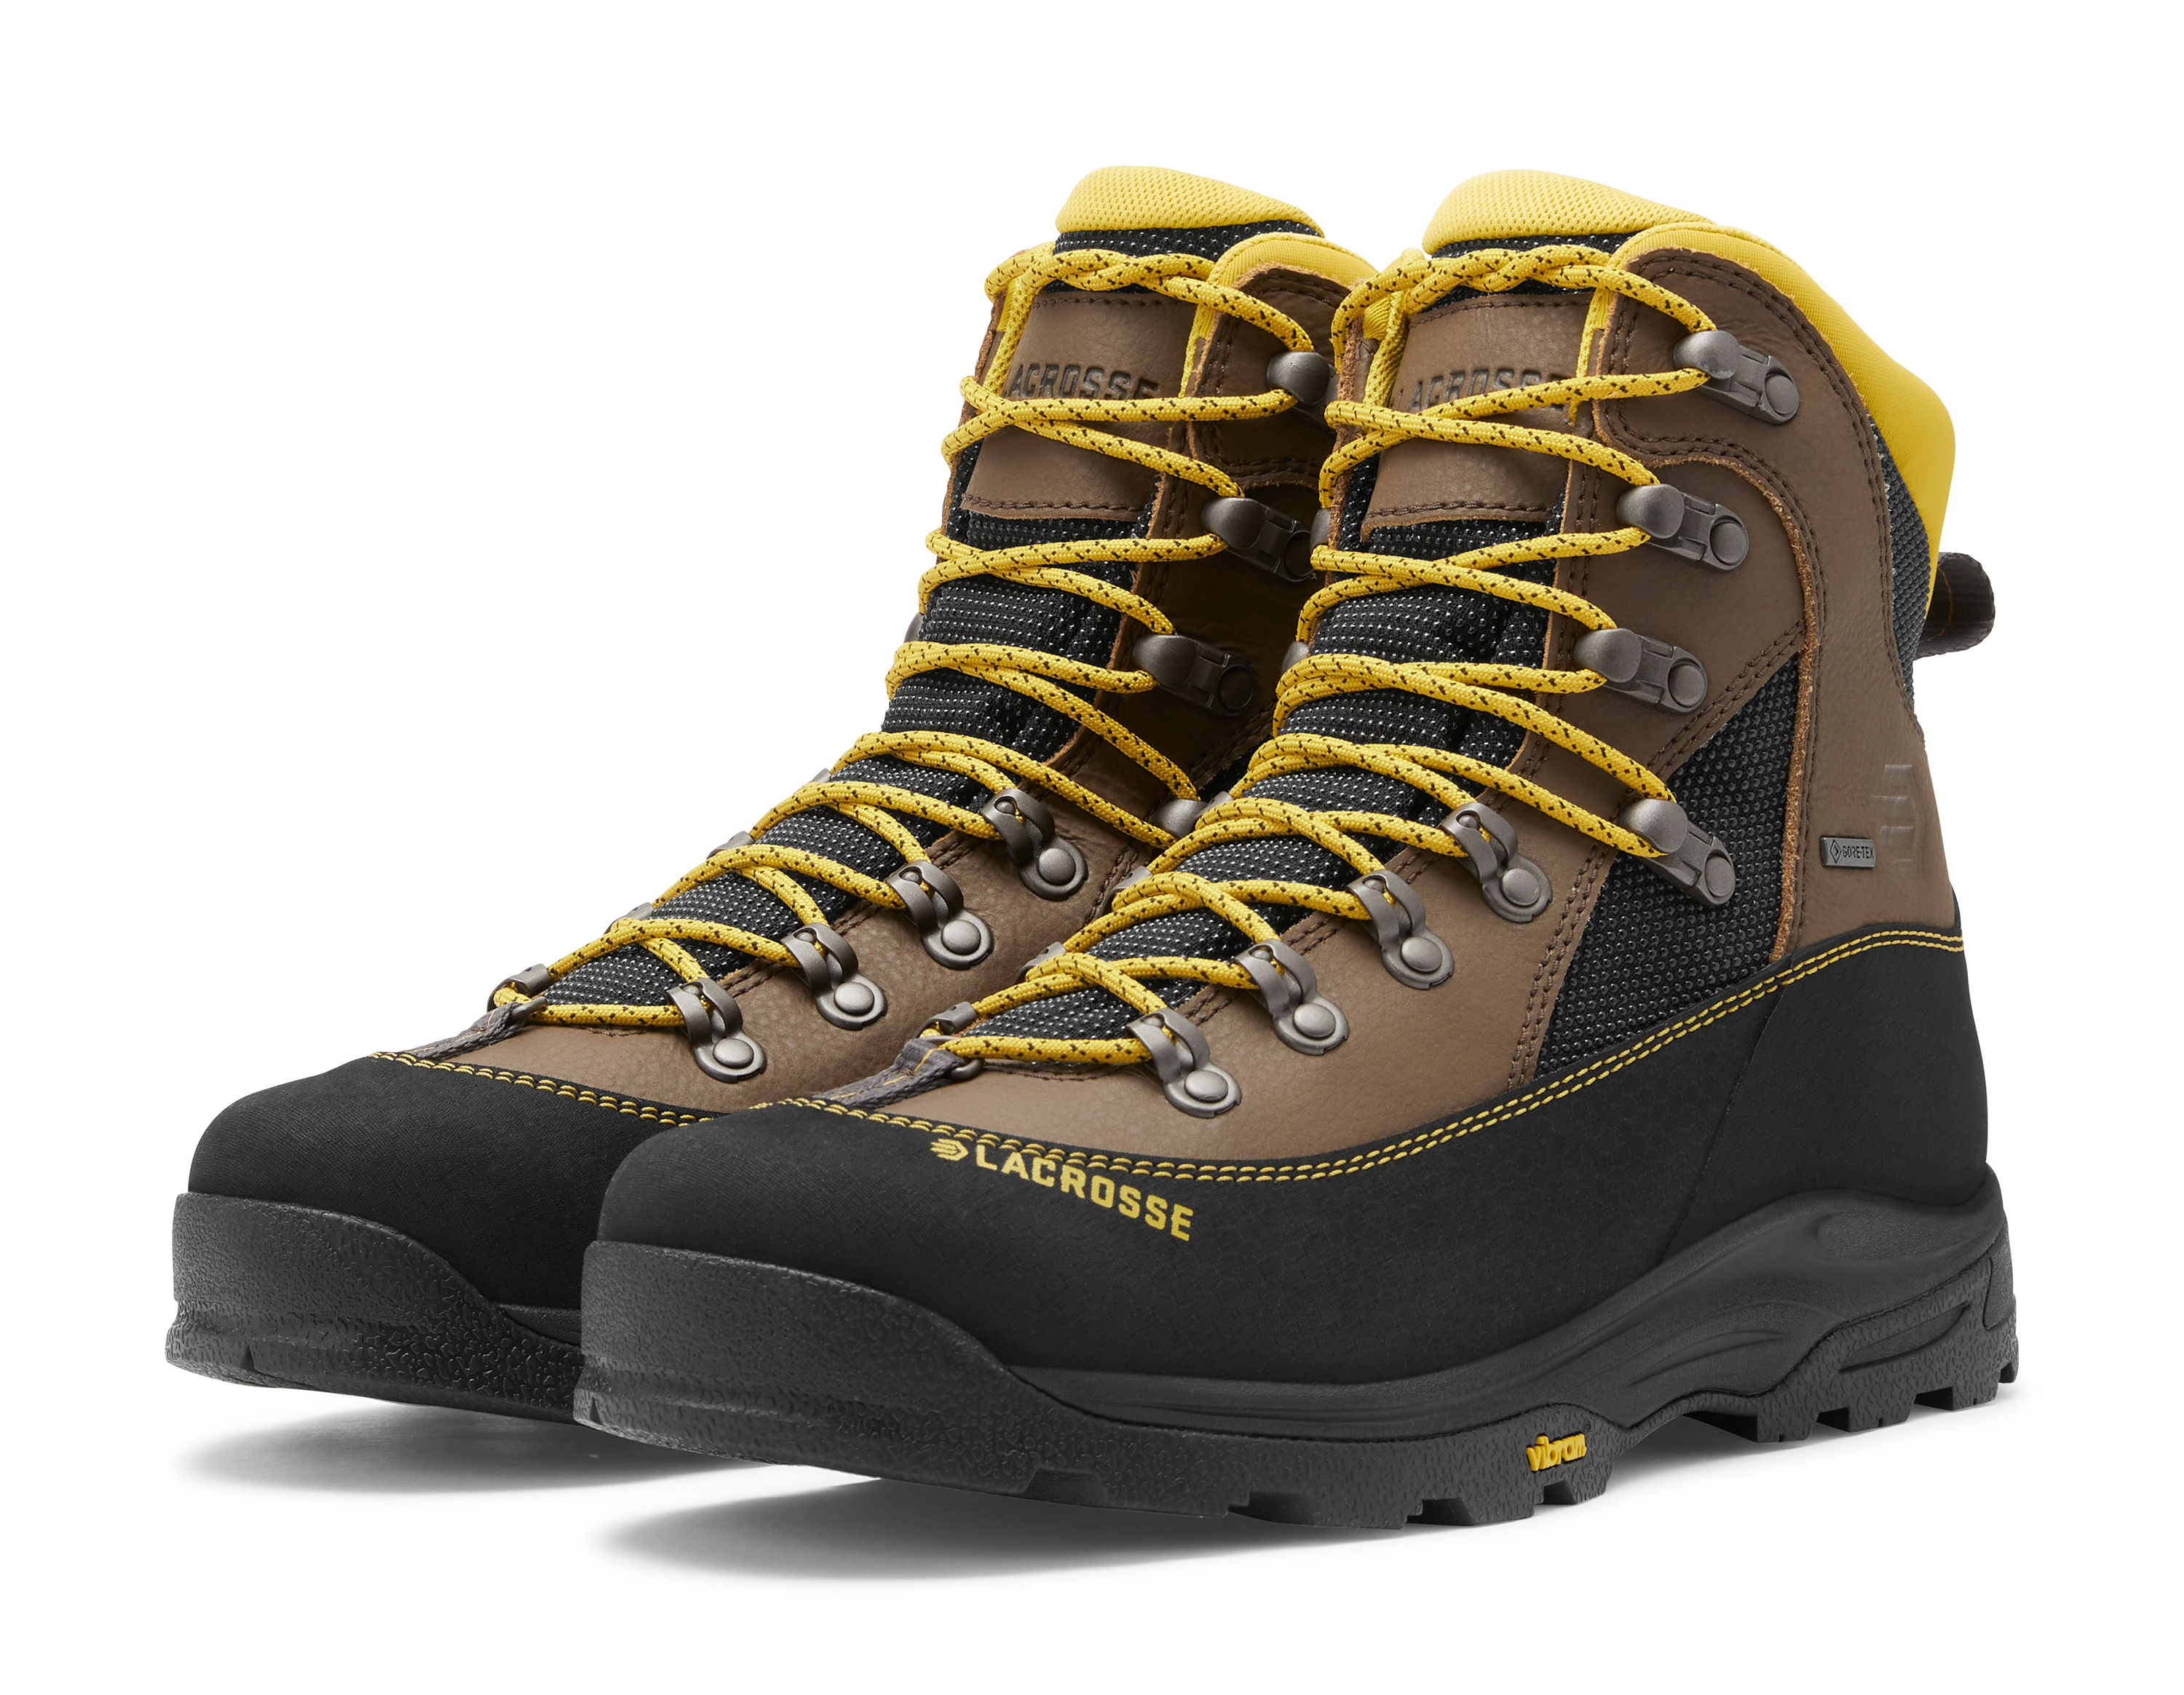 LaCrosse Ursa MS GORE-TEX Hunting Boots for Men - Brown/Gold - 14W